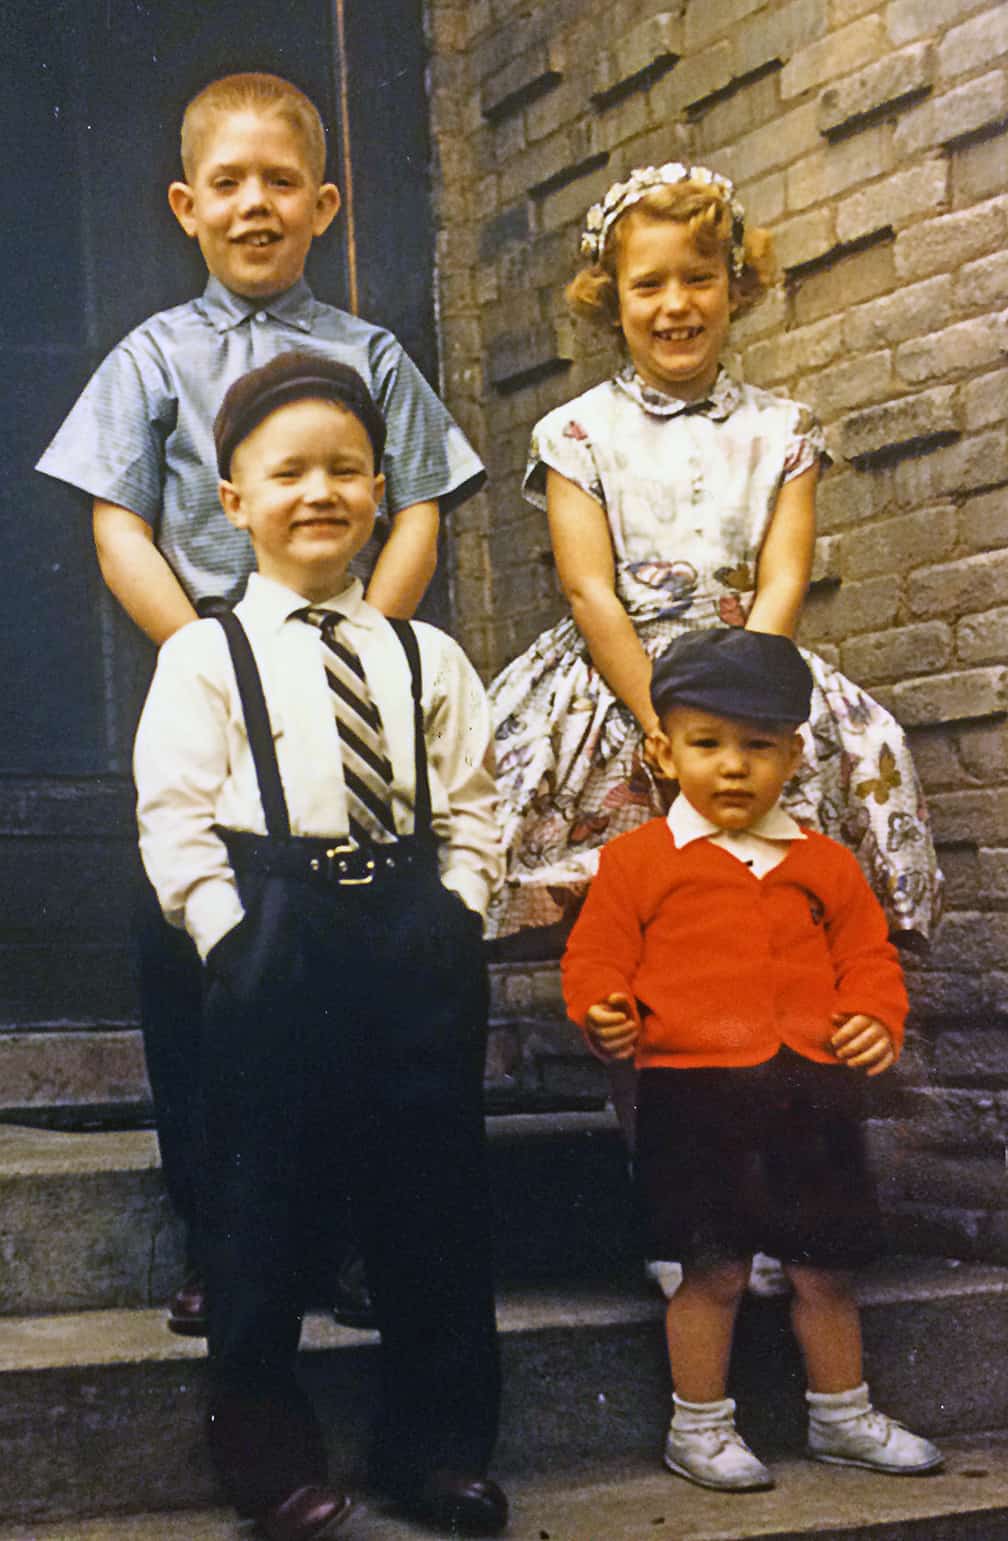 This photo was taken on an Easter Sunday when my family lived in Muncie, Indiana. My older brother Steve was on my side, and Chuck (in suspenders) and Phil (red jacket) were below. My brother Rich was an infant and in my mother's arms when this photo was taken. 